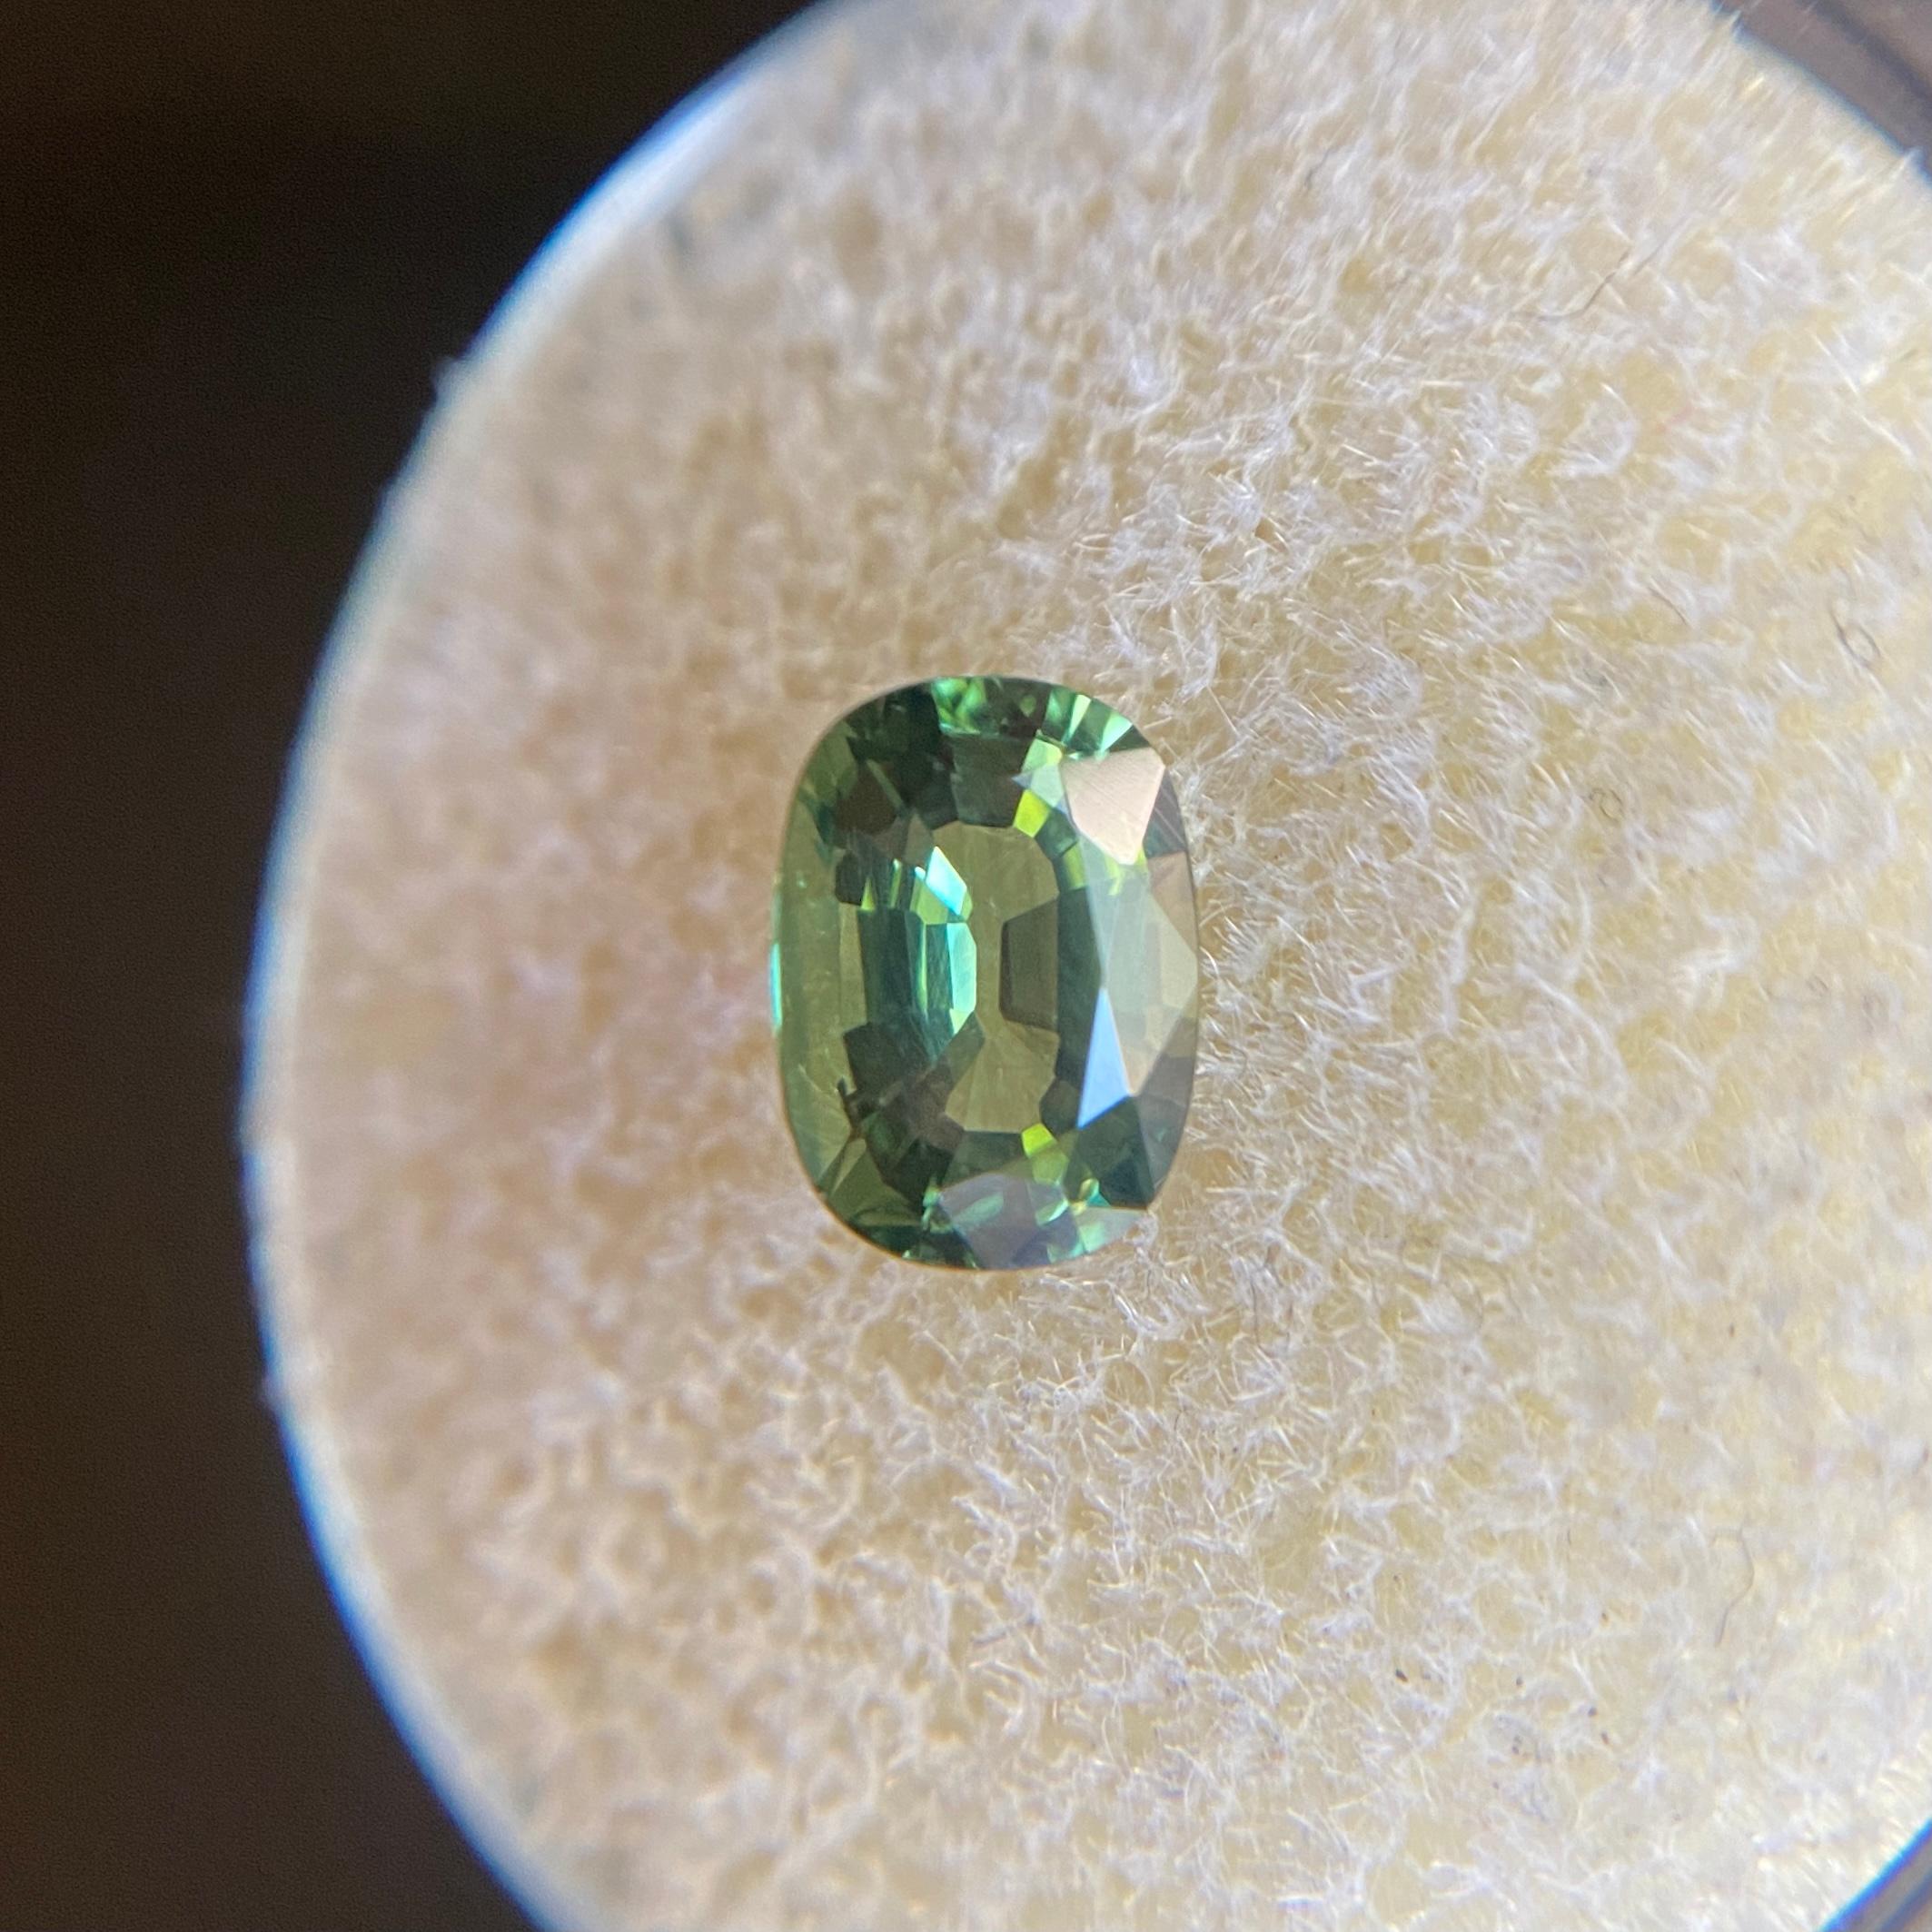 Natural Vivid Green Thai Sapphire.

1.19 Carat with a beautiful vivid green colour and a an excellent cushion cut with ideal polish to show great shine and colour, would look lovely in jewellery. Also has good clarity, some natural inclusions